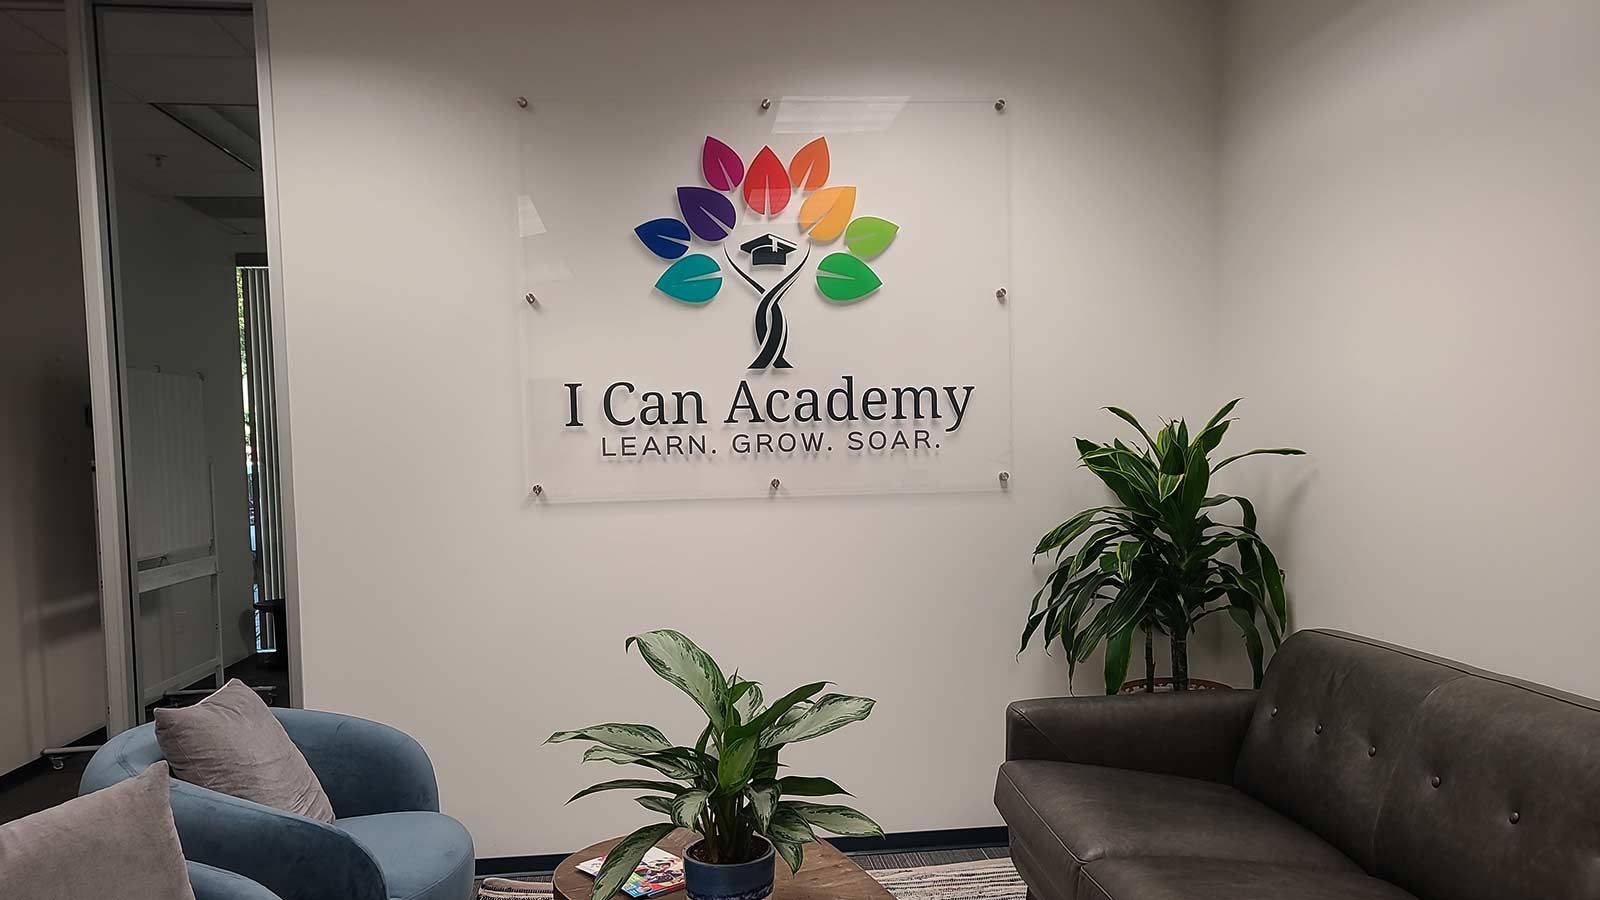 I Can Academy interior sign mounted on the wall